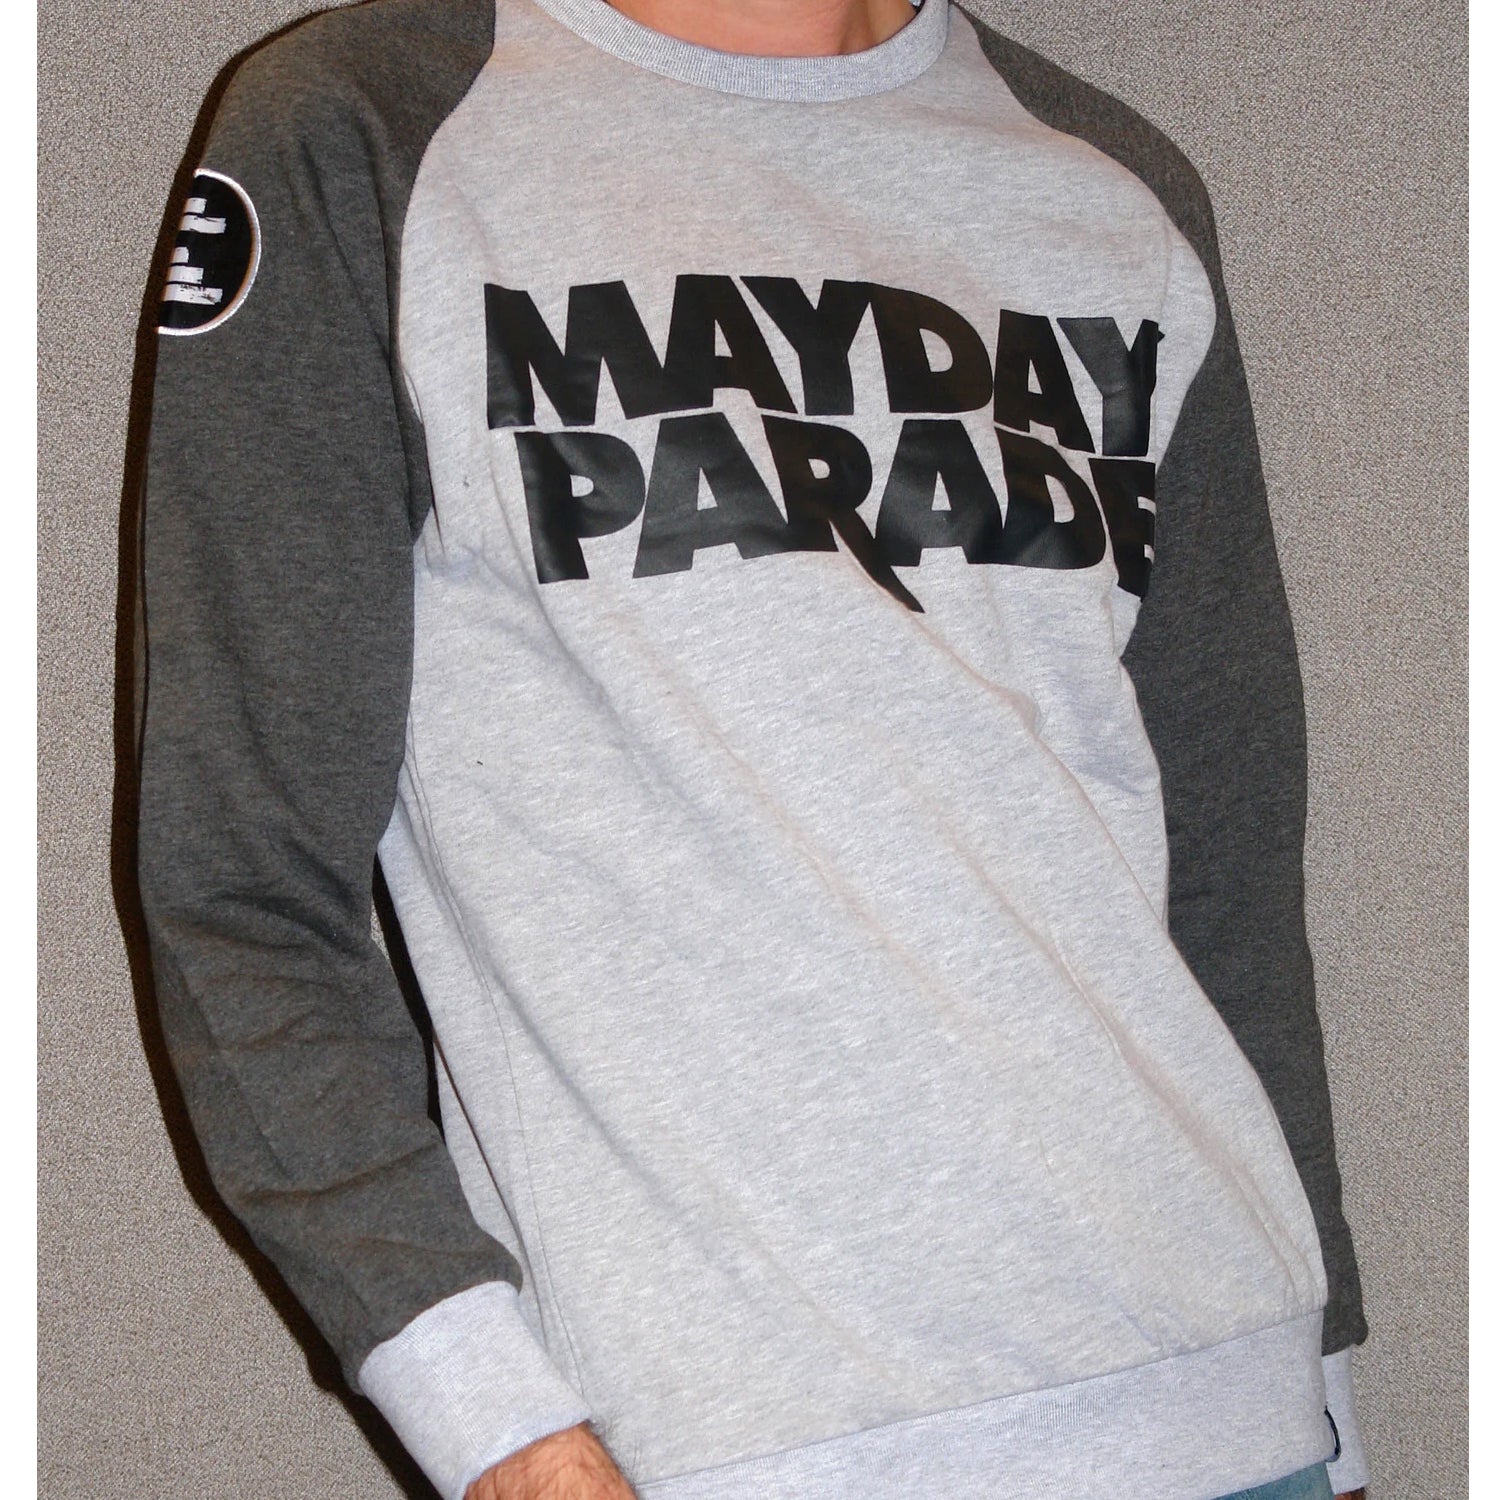 image from the neck down of a man in front of a grey background wearing a crewneck sweatshirt. the sleeves are a dark heather grey, and the chest/body is light heather grey. front chest of crewneck says stacked in black mayday parade. circle black patch with white rectangles is on the left sleeve